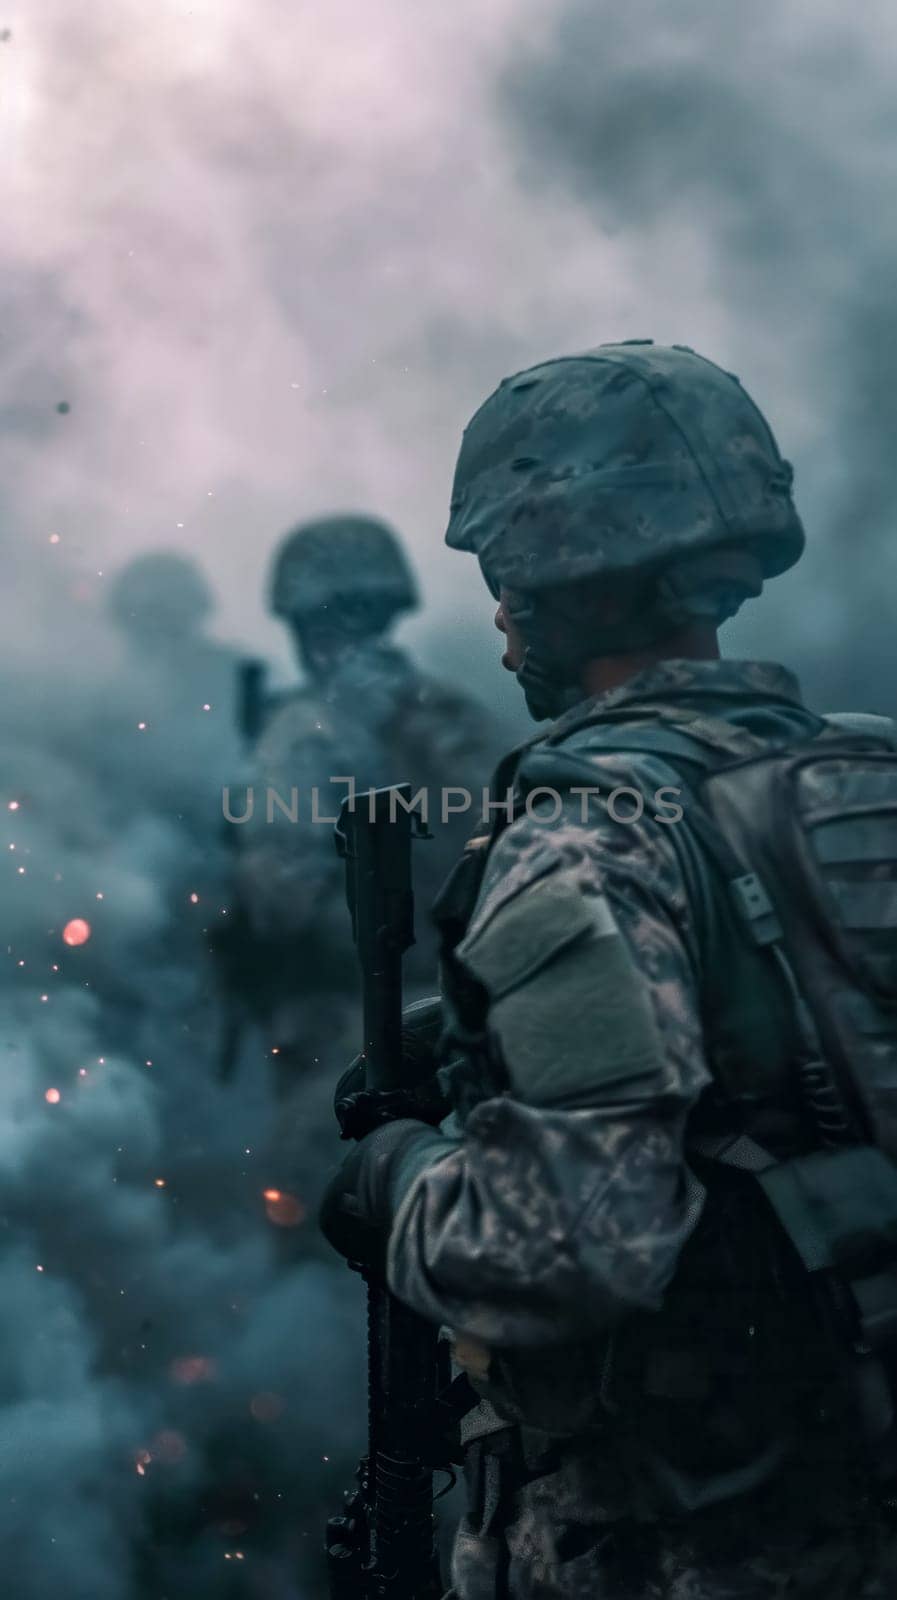 A solemn soldier in full gear stands in focus in the foreground with a rifle, while the background features blurred figures in a smoky, possibly combat-related environment. vertical